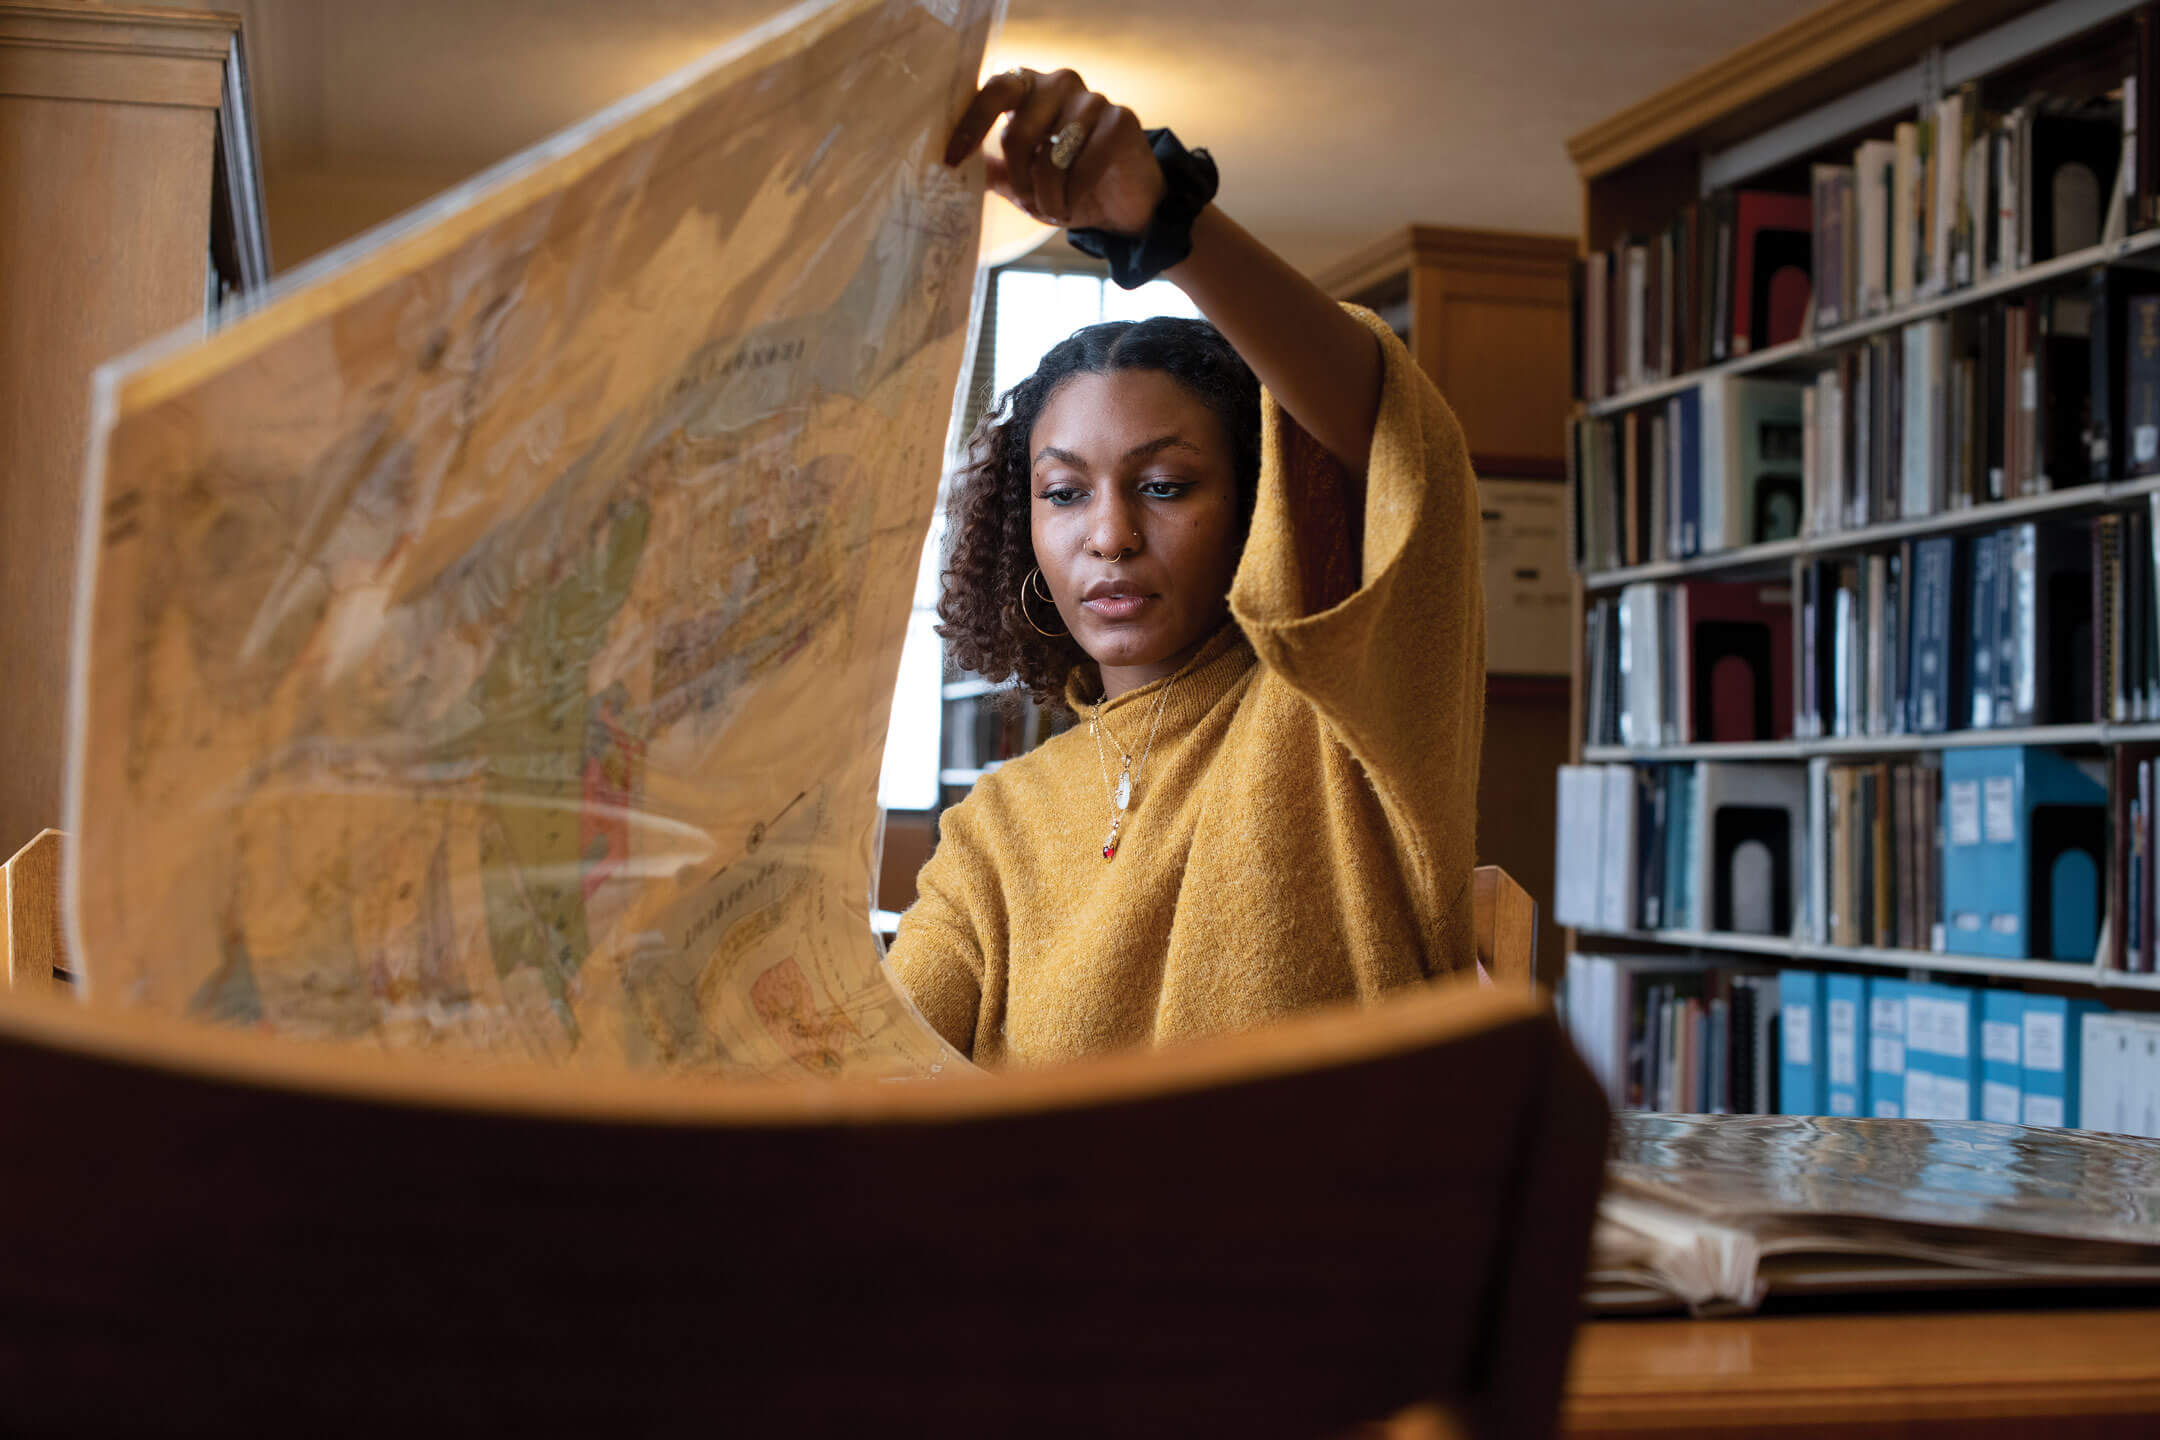 Leah Green looking at a map while sitting in a library.